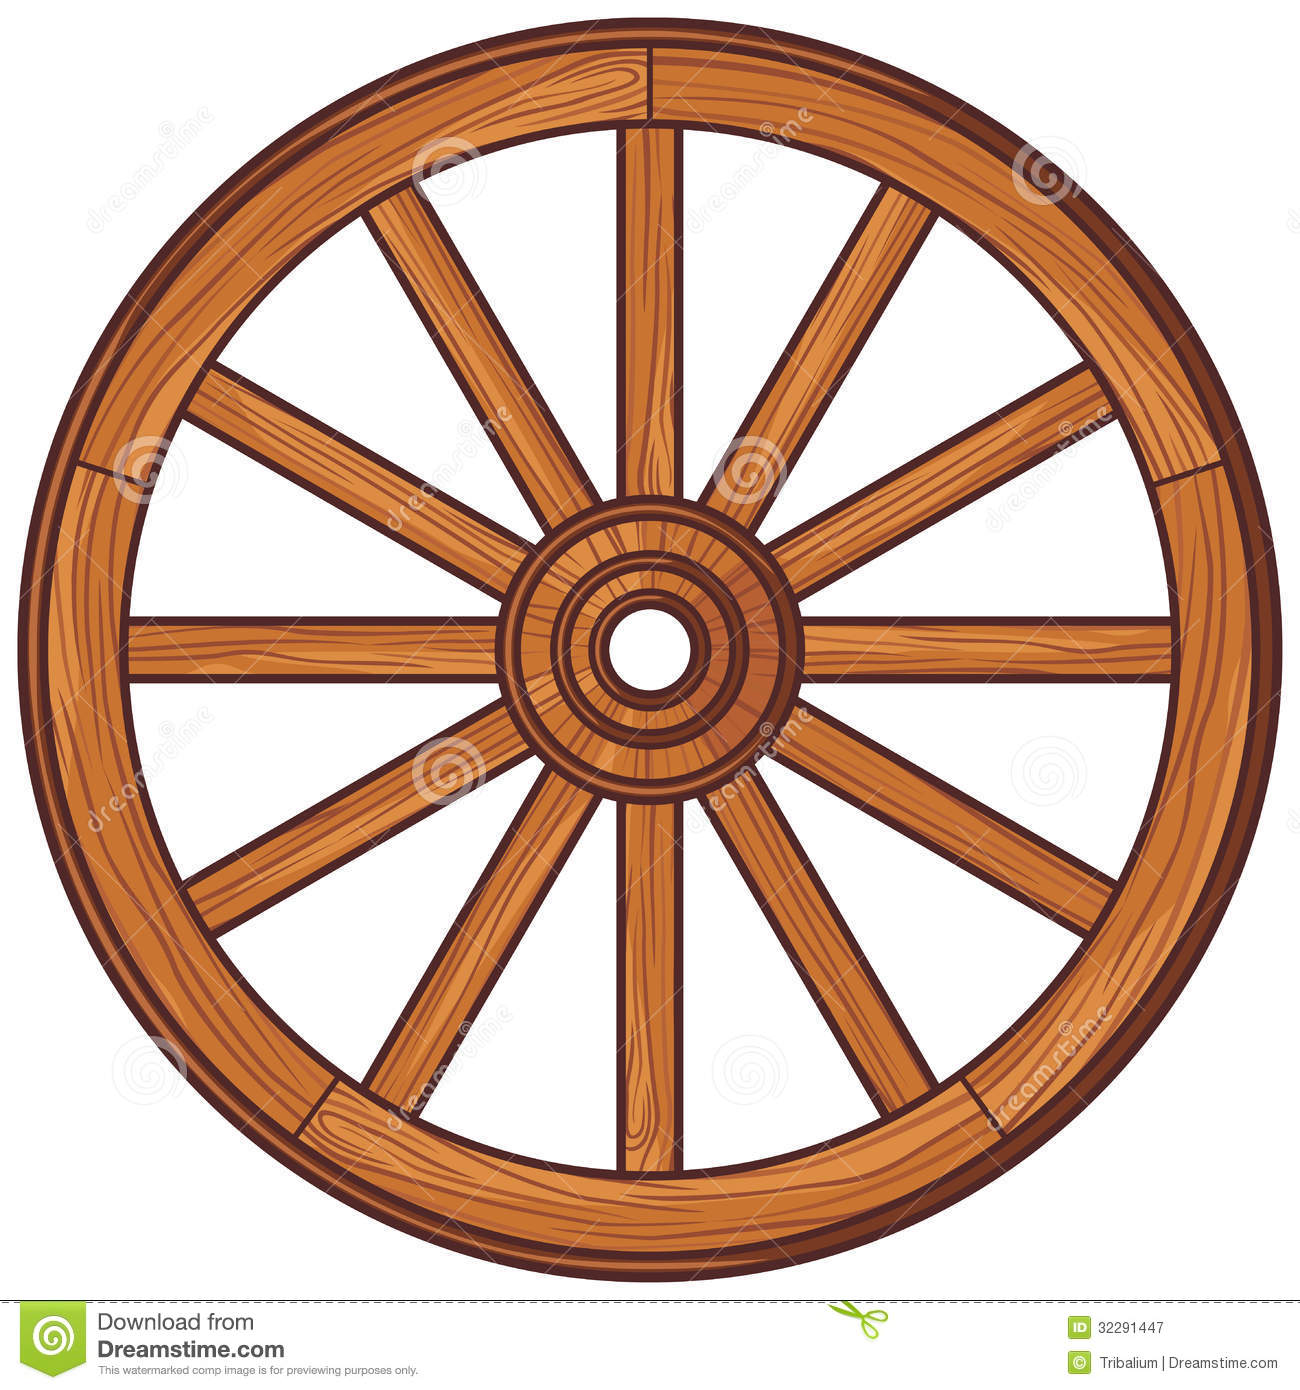 Wooden Wheel Royalty Free Stock Photography   Image  32291447